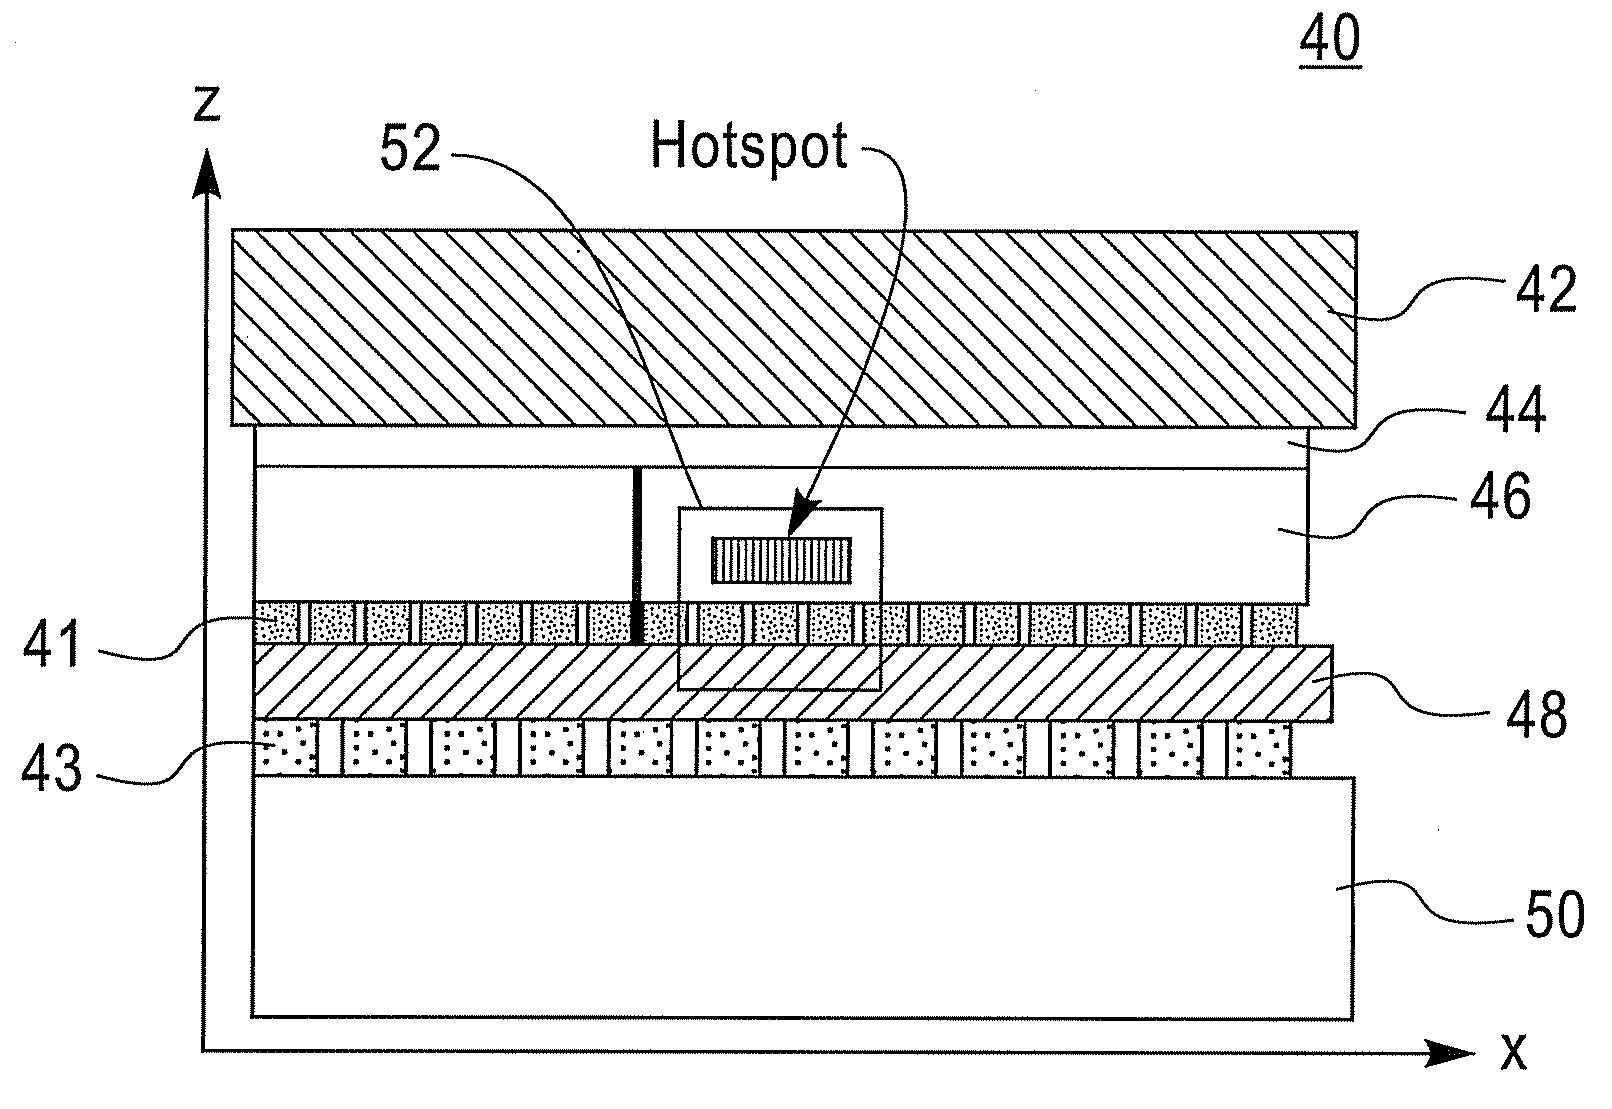 Method to enhance micro-c4 reliability by reducing the impact of hot spot pulsing